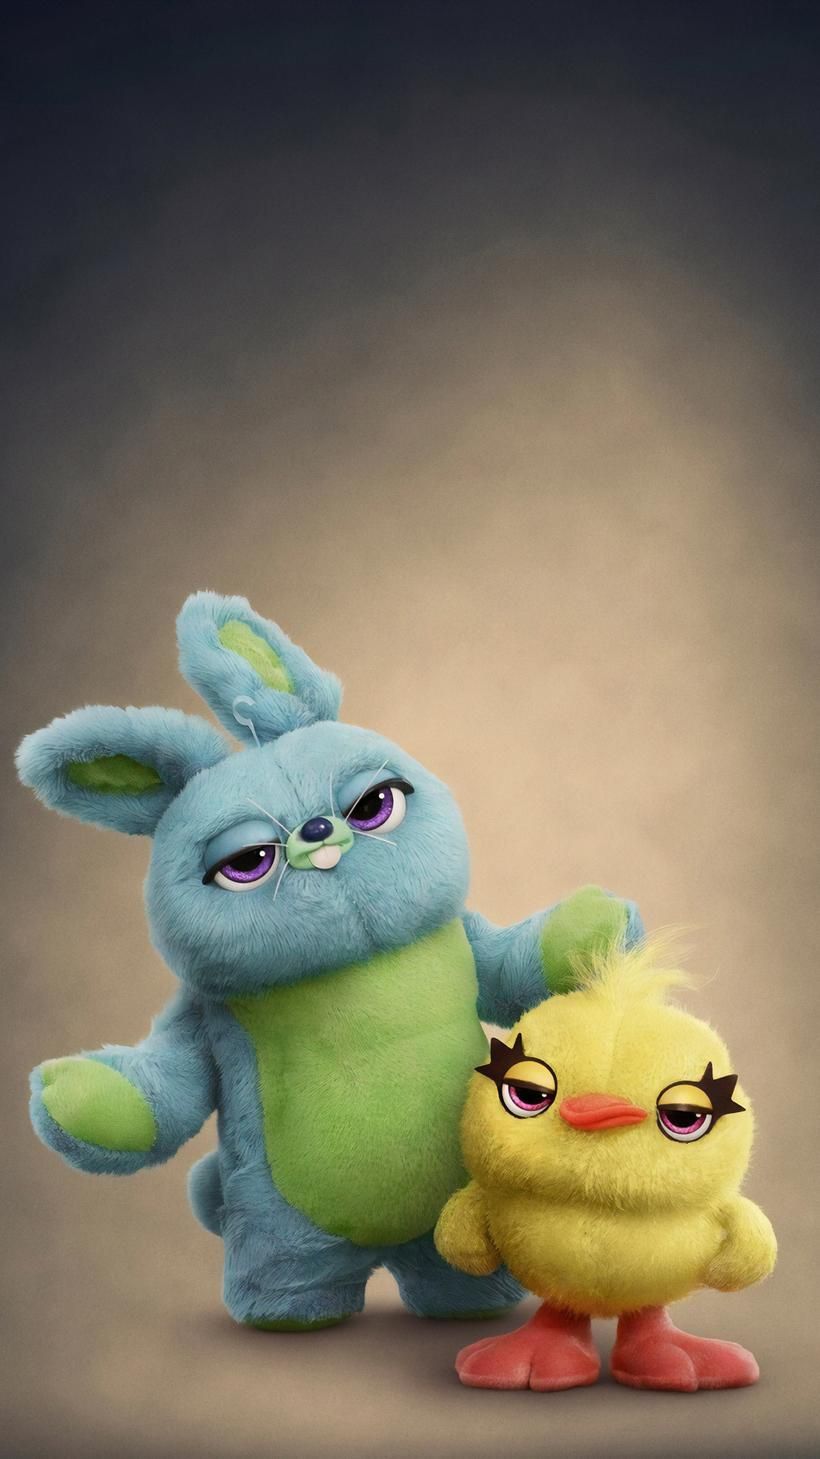 Toy Story 4 2019 Phone Wallpaper in 2019 Disney New toy